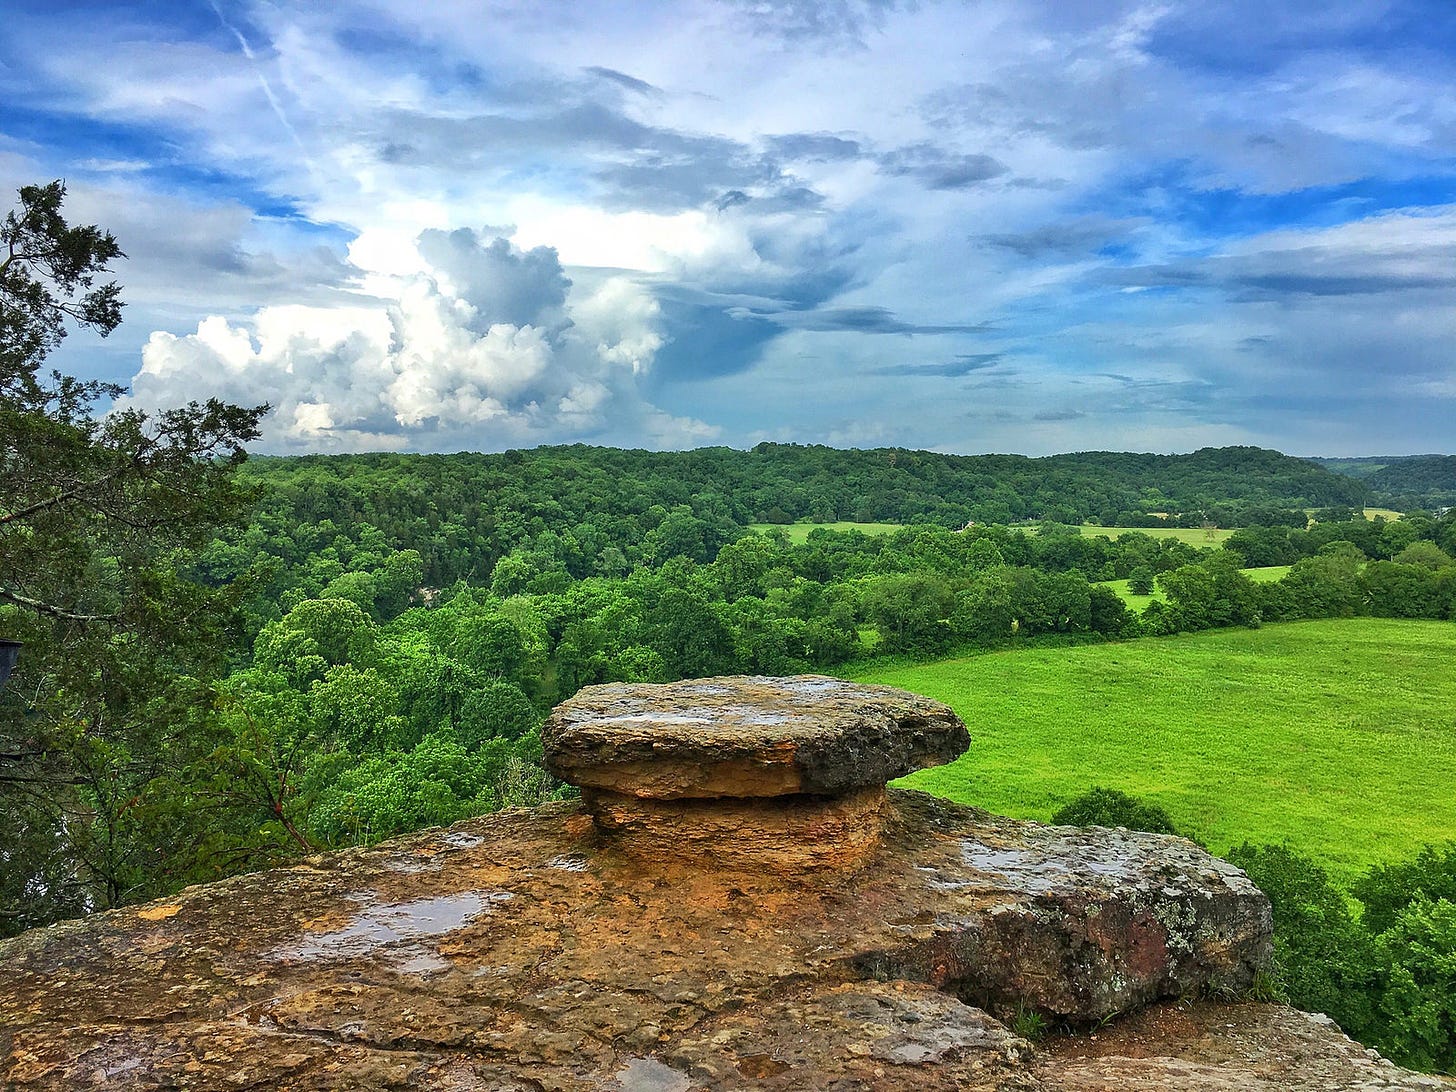 This Nashville Area Hike Has Unforgettable Views!